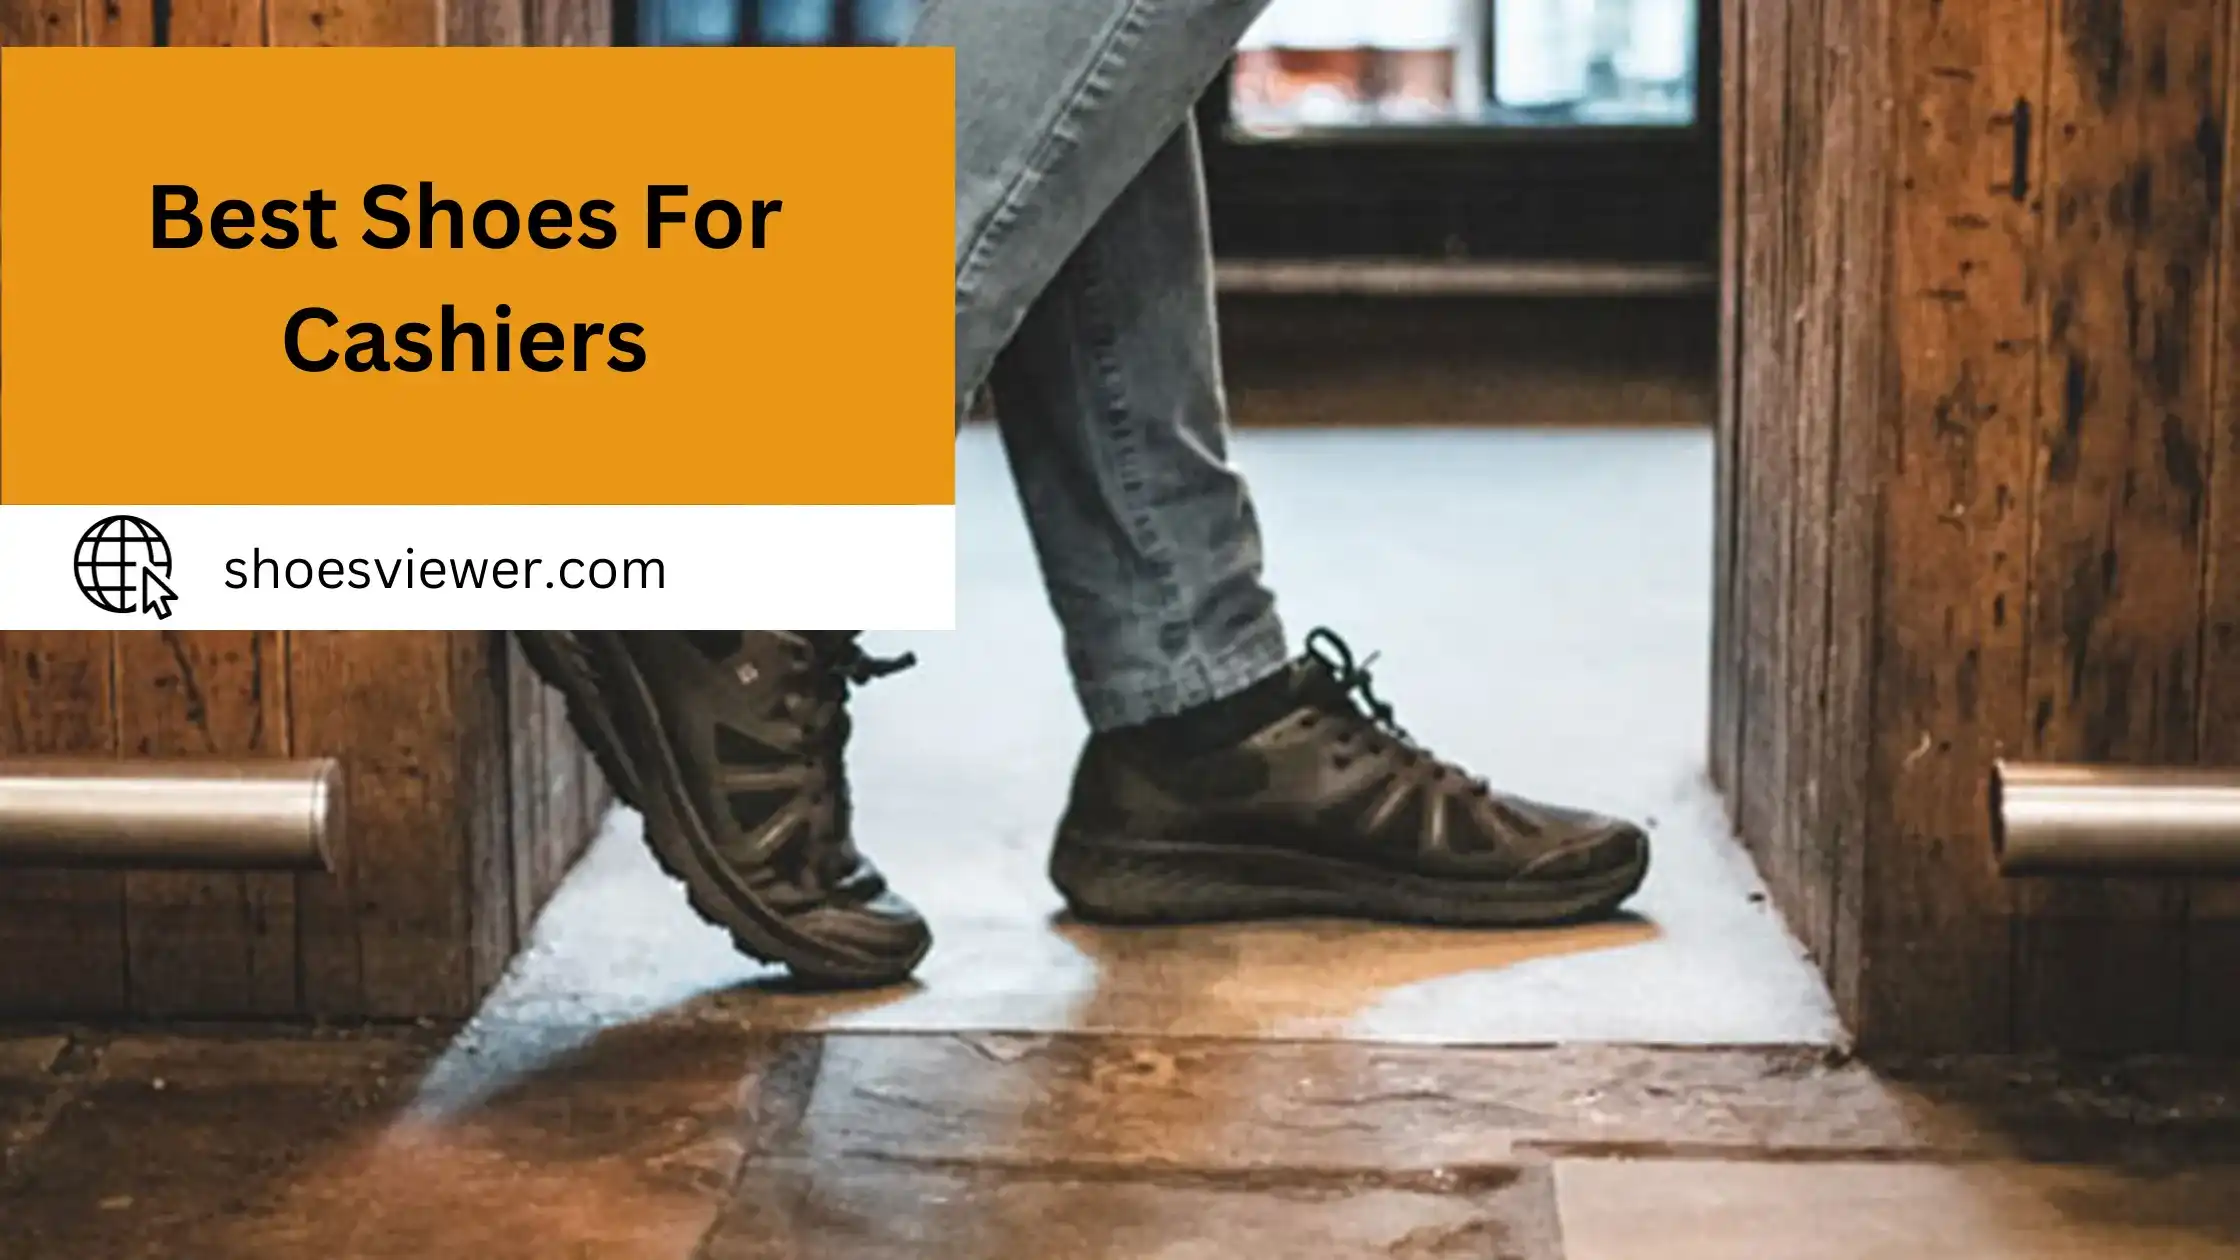 Best Shoes For Cashiers - A Comprehensive Guide